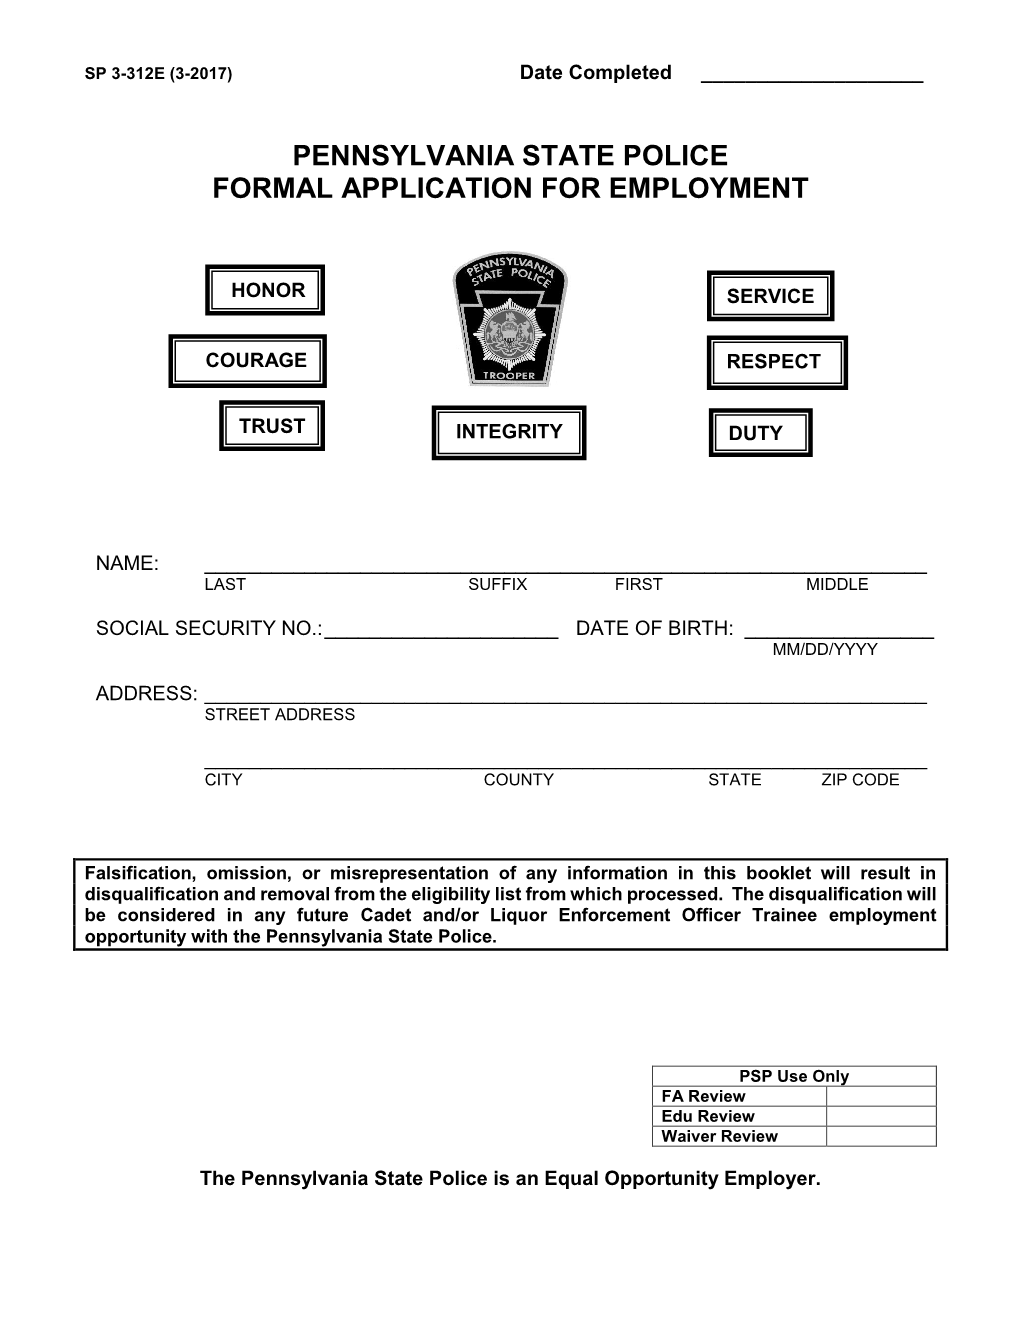 Formal Application for Employment